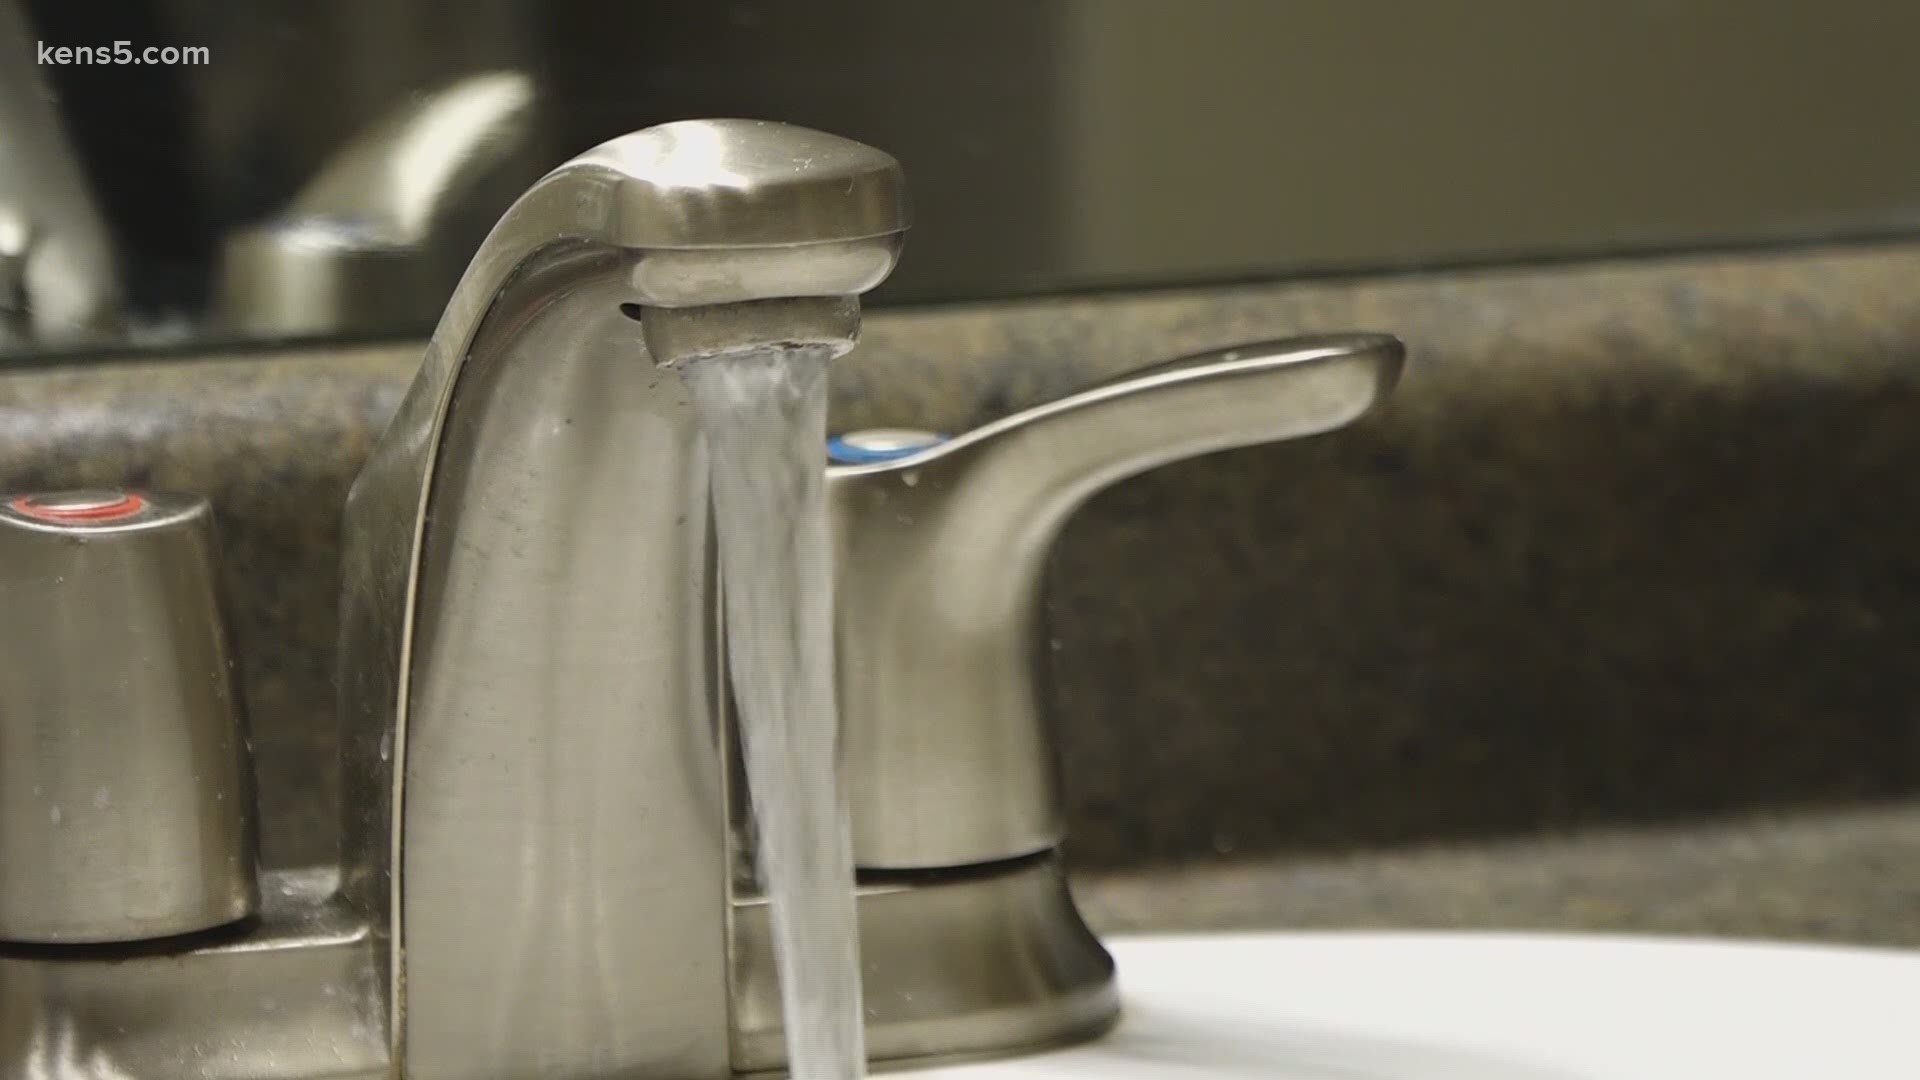 KENS 5 spoke to San Antonio Water System about water outages and why some community members have been without water.